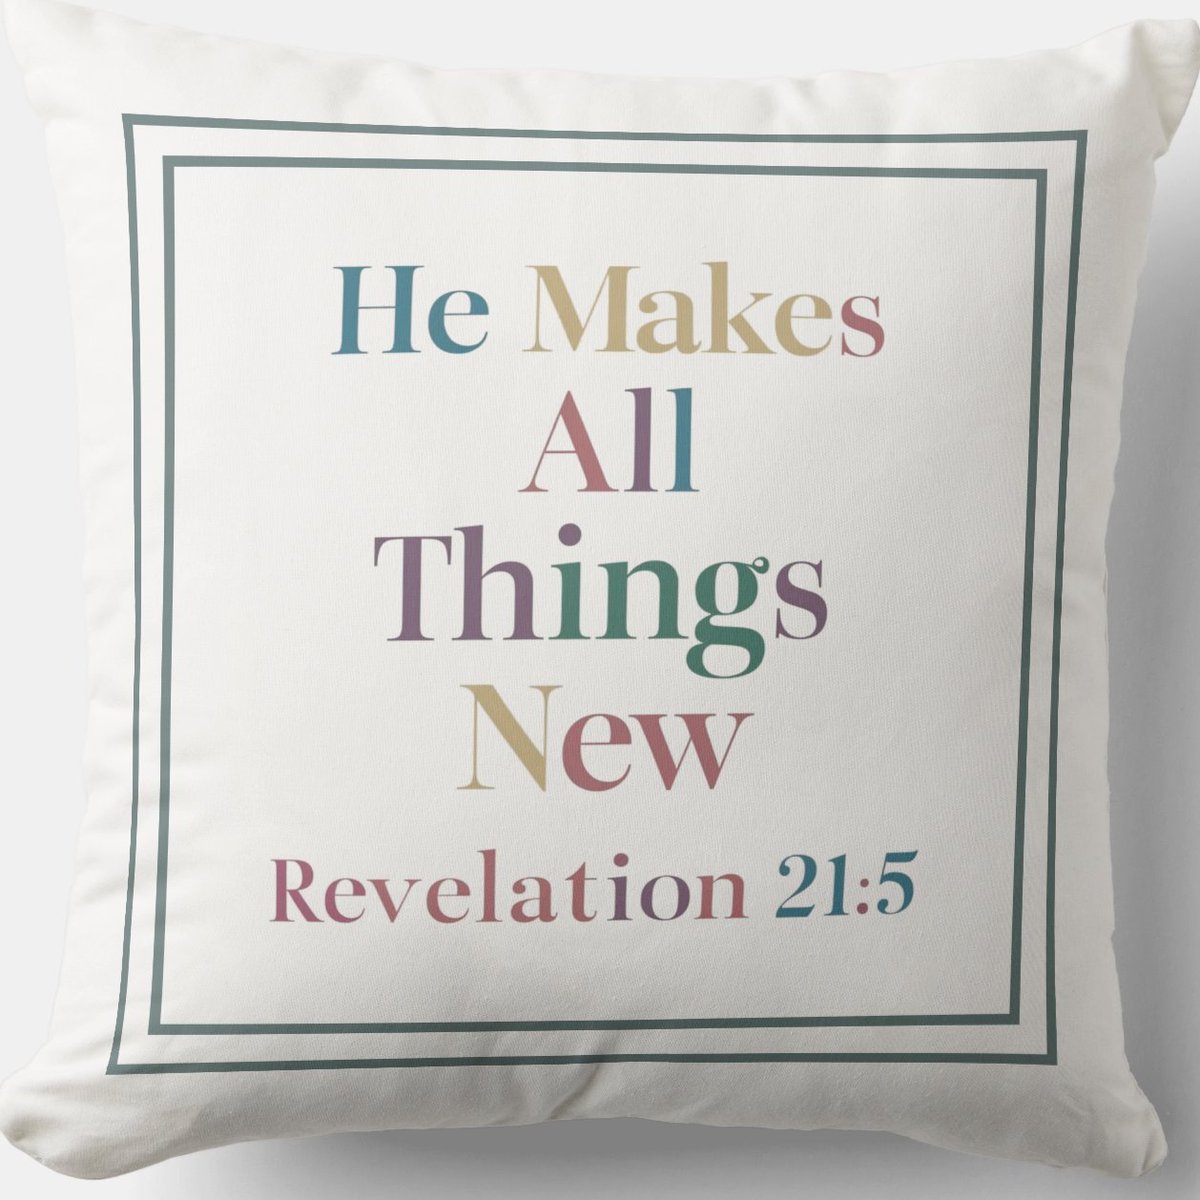 He Makes All Things New: Hope & Renewal zazzle.com/he_makes_all_t… New Throw #Pillow #Blessing #JesusChrist #JesusSaves #Jesus #christian #spiritual #Homedecoration #uniquegift #giftideas #MothersDayGifts #giftformom #giftidea #HolySpirit #pillows #giftshop #giftsforher #giftsformom